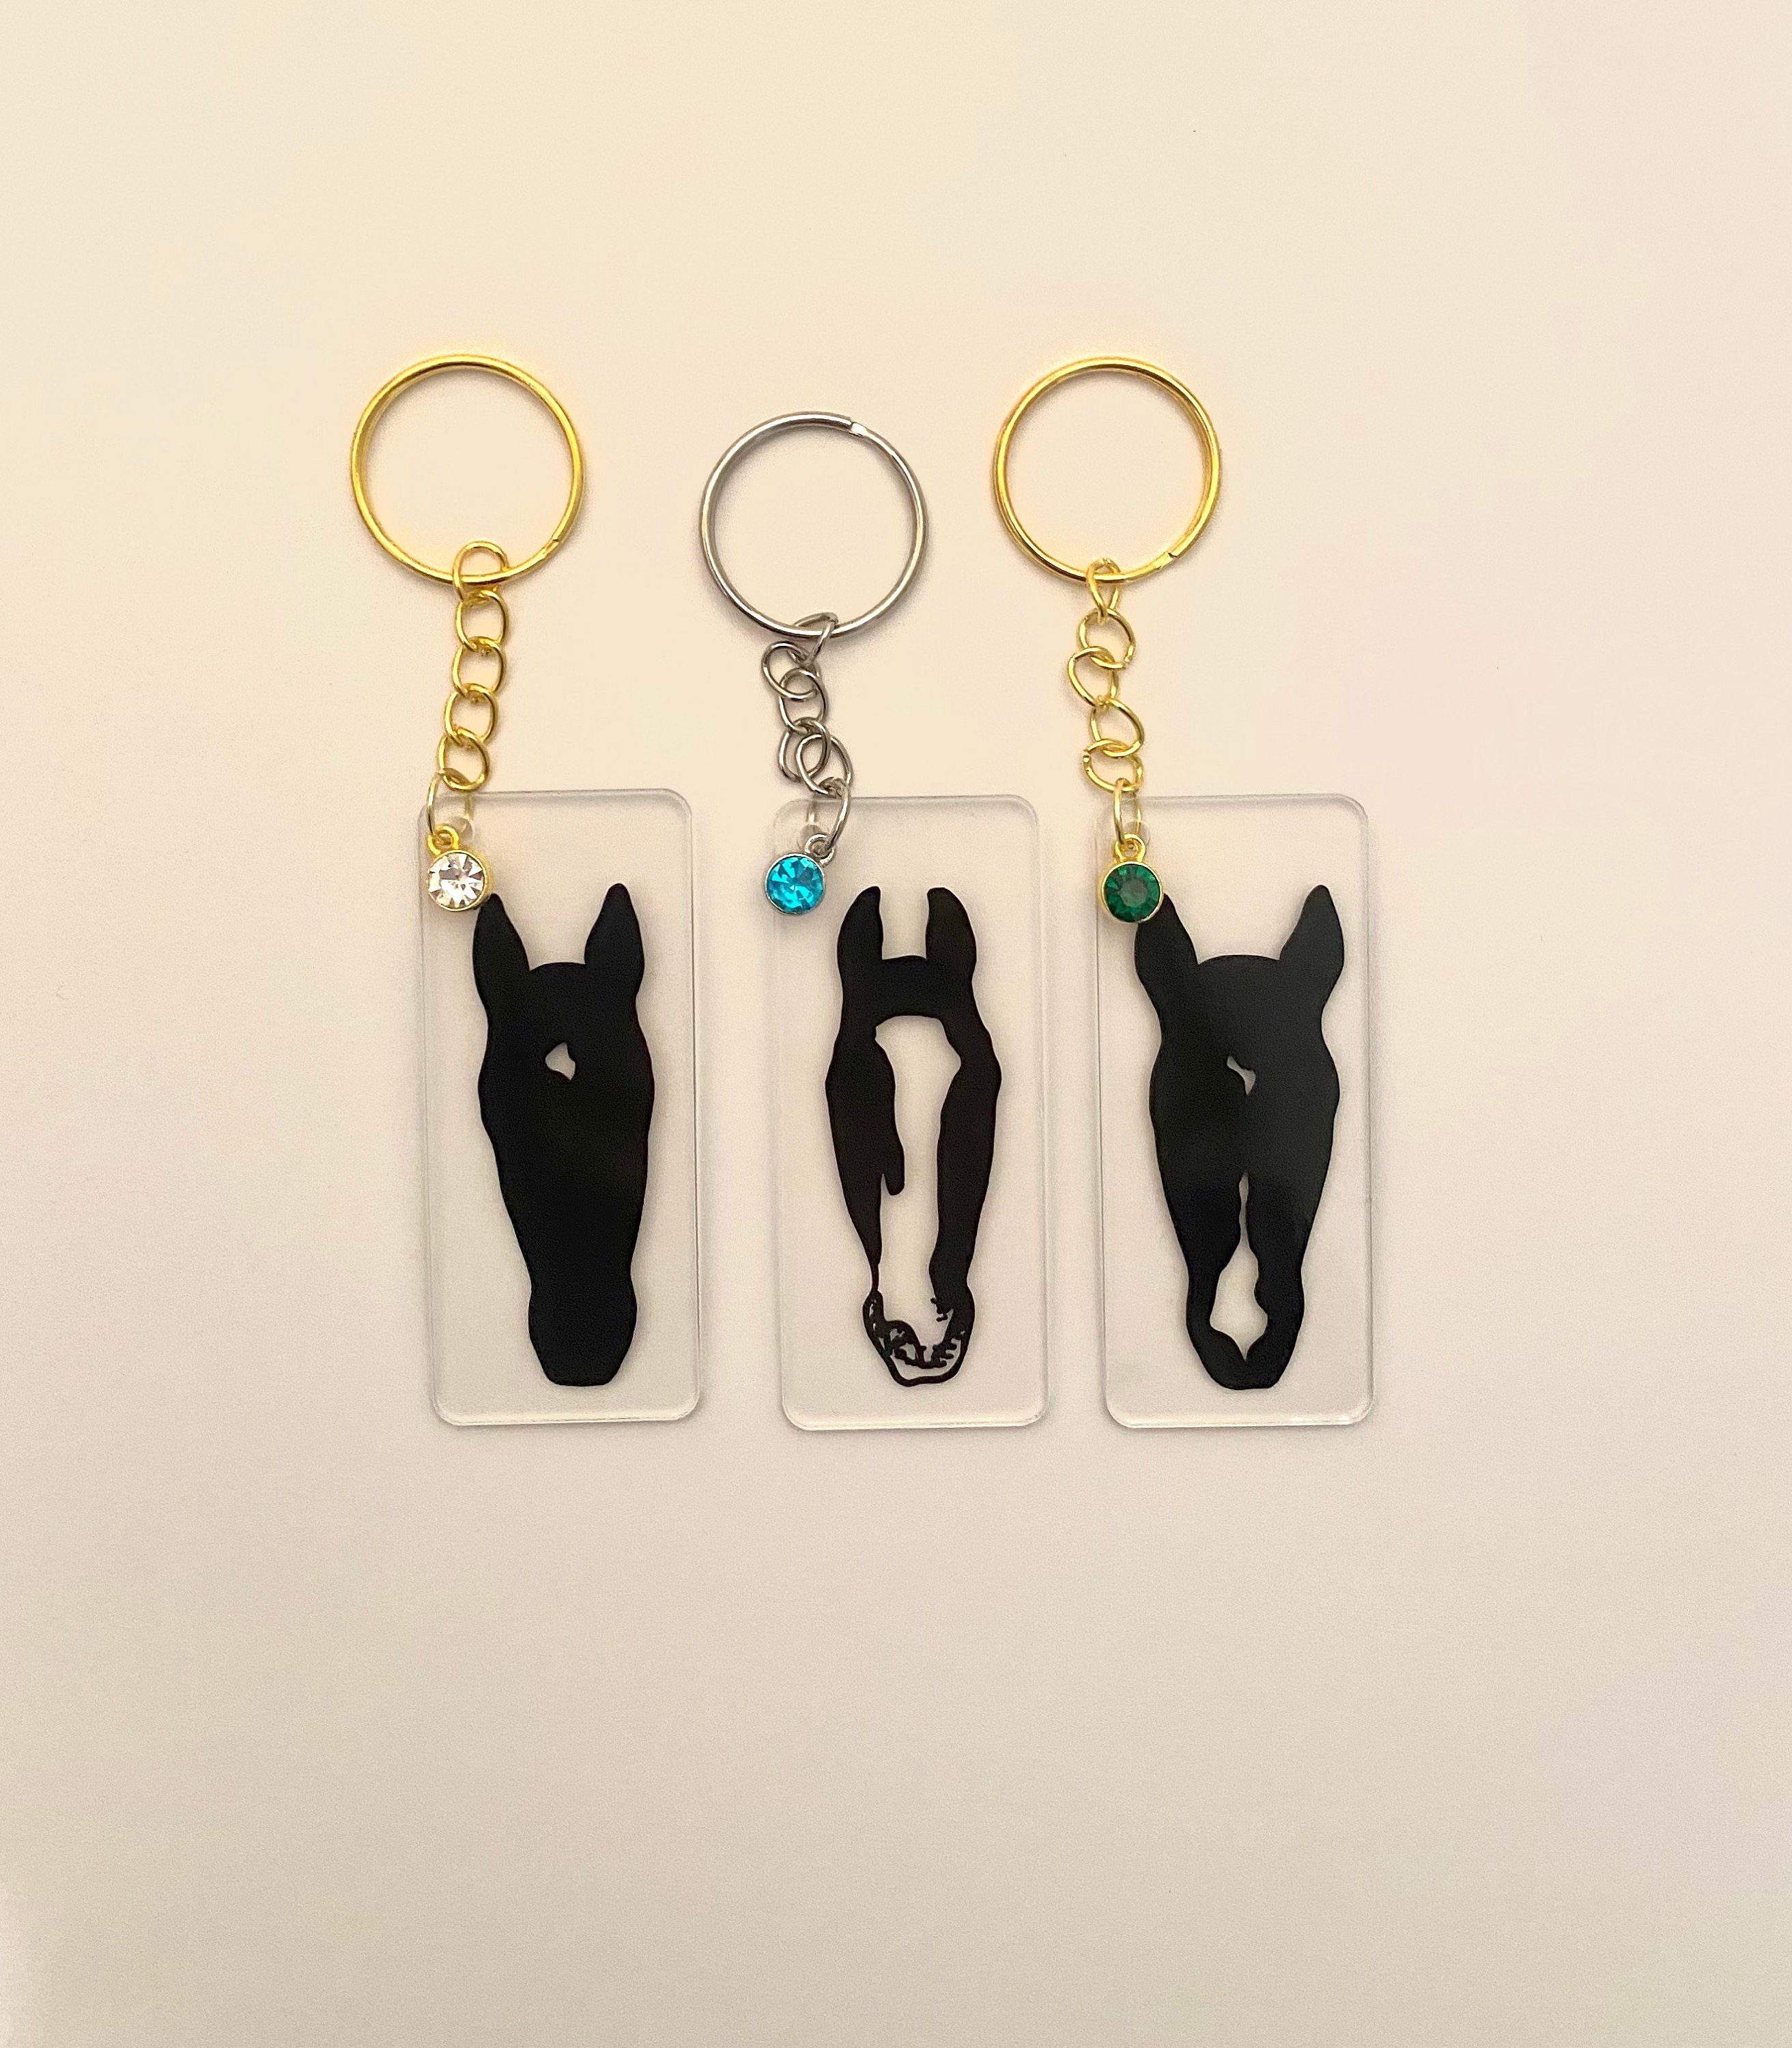 Small Size Beon the Leather Horse Keychain With Lobster 